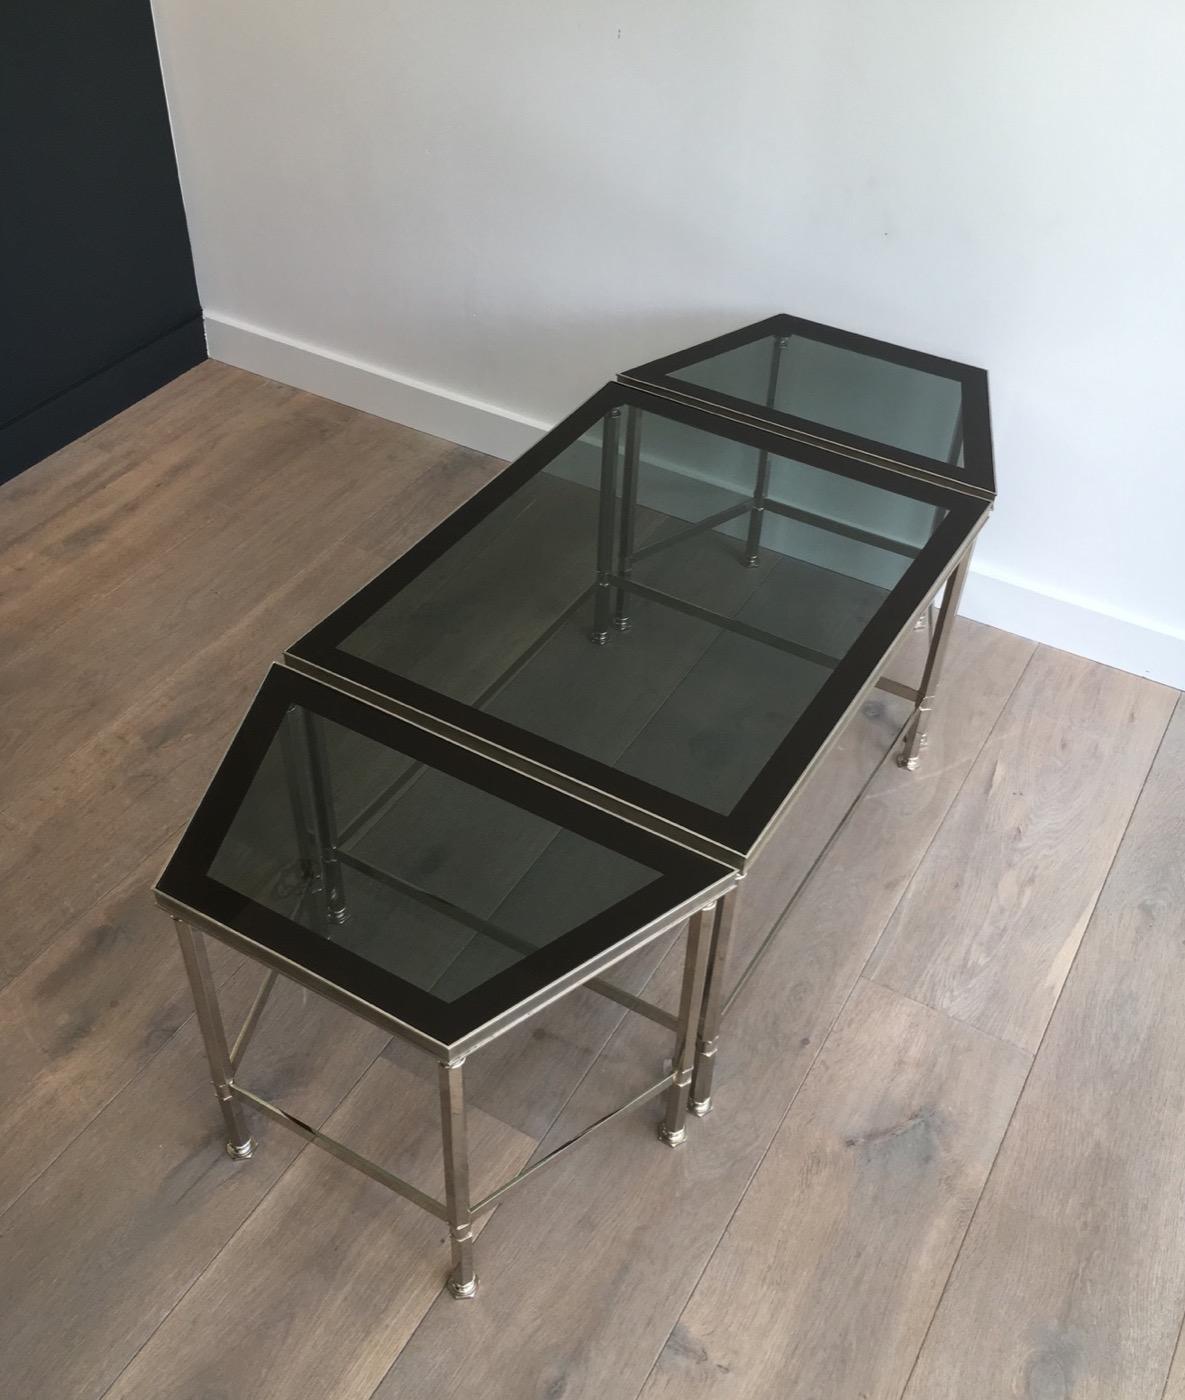 Rare Nickeled Tripartite Coffee Table with Glass Tops Lacquered All Around For Sale 14